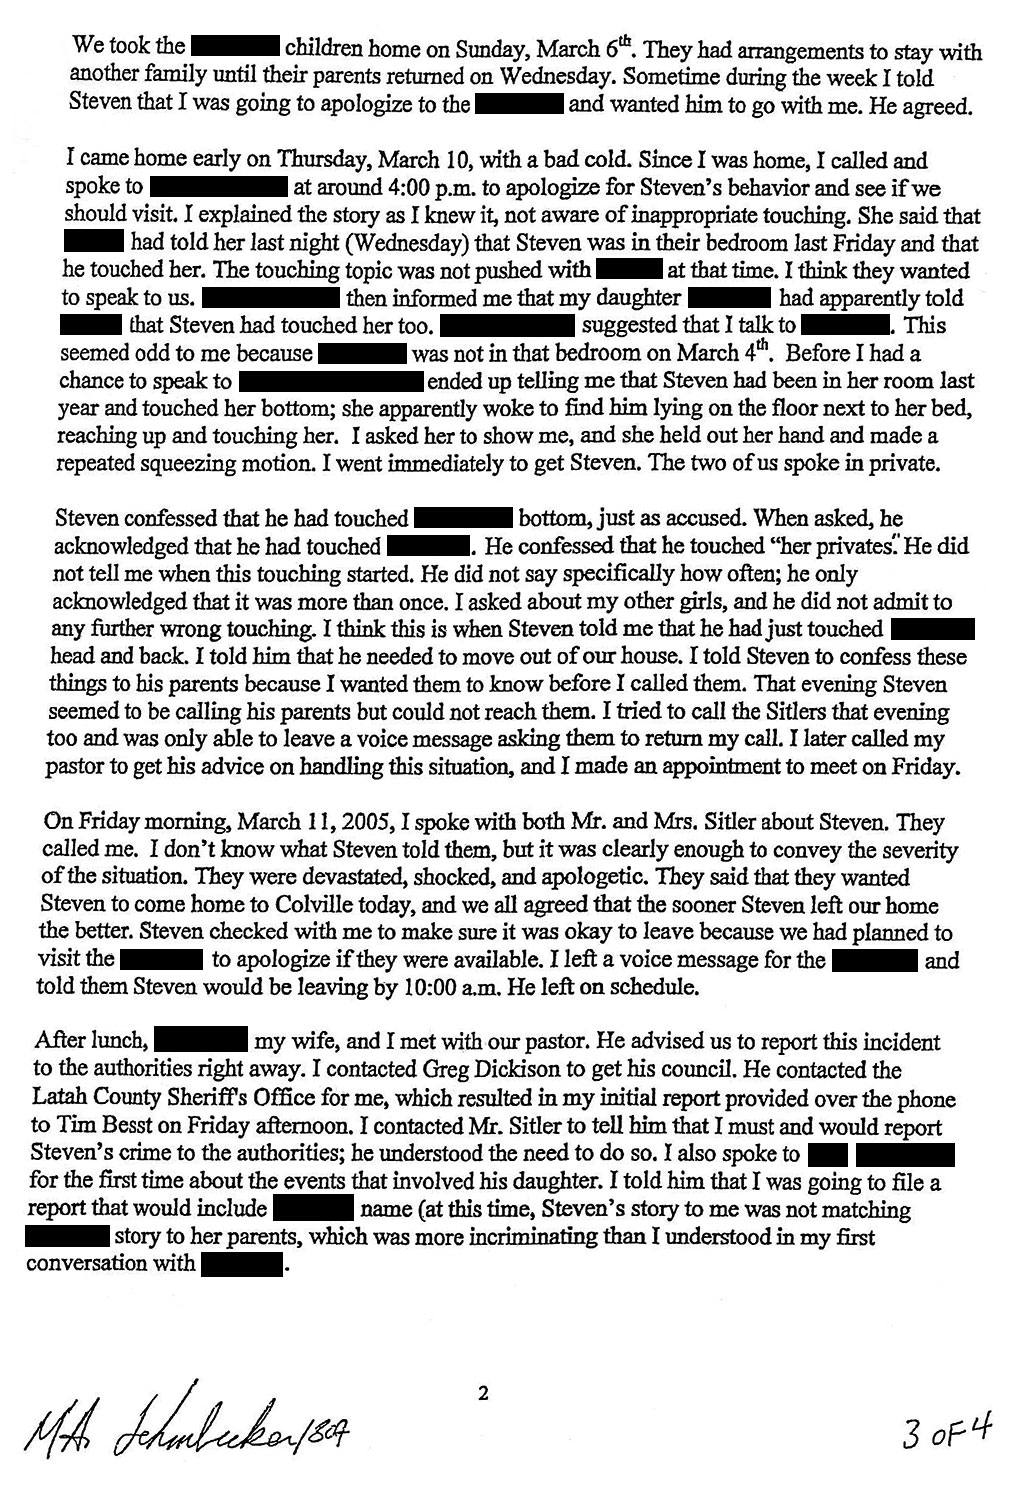 Written Statement page 3: “He confessed that he touched her ‘privates.’”